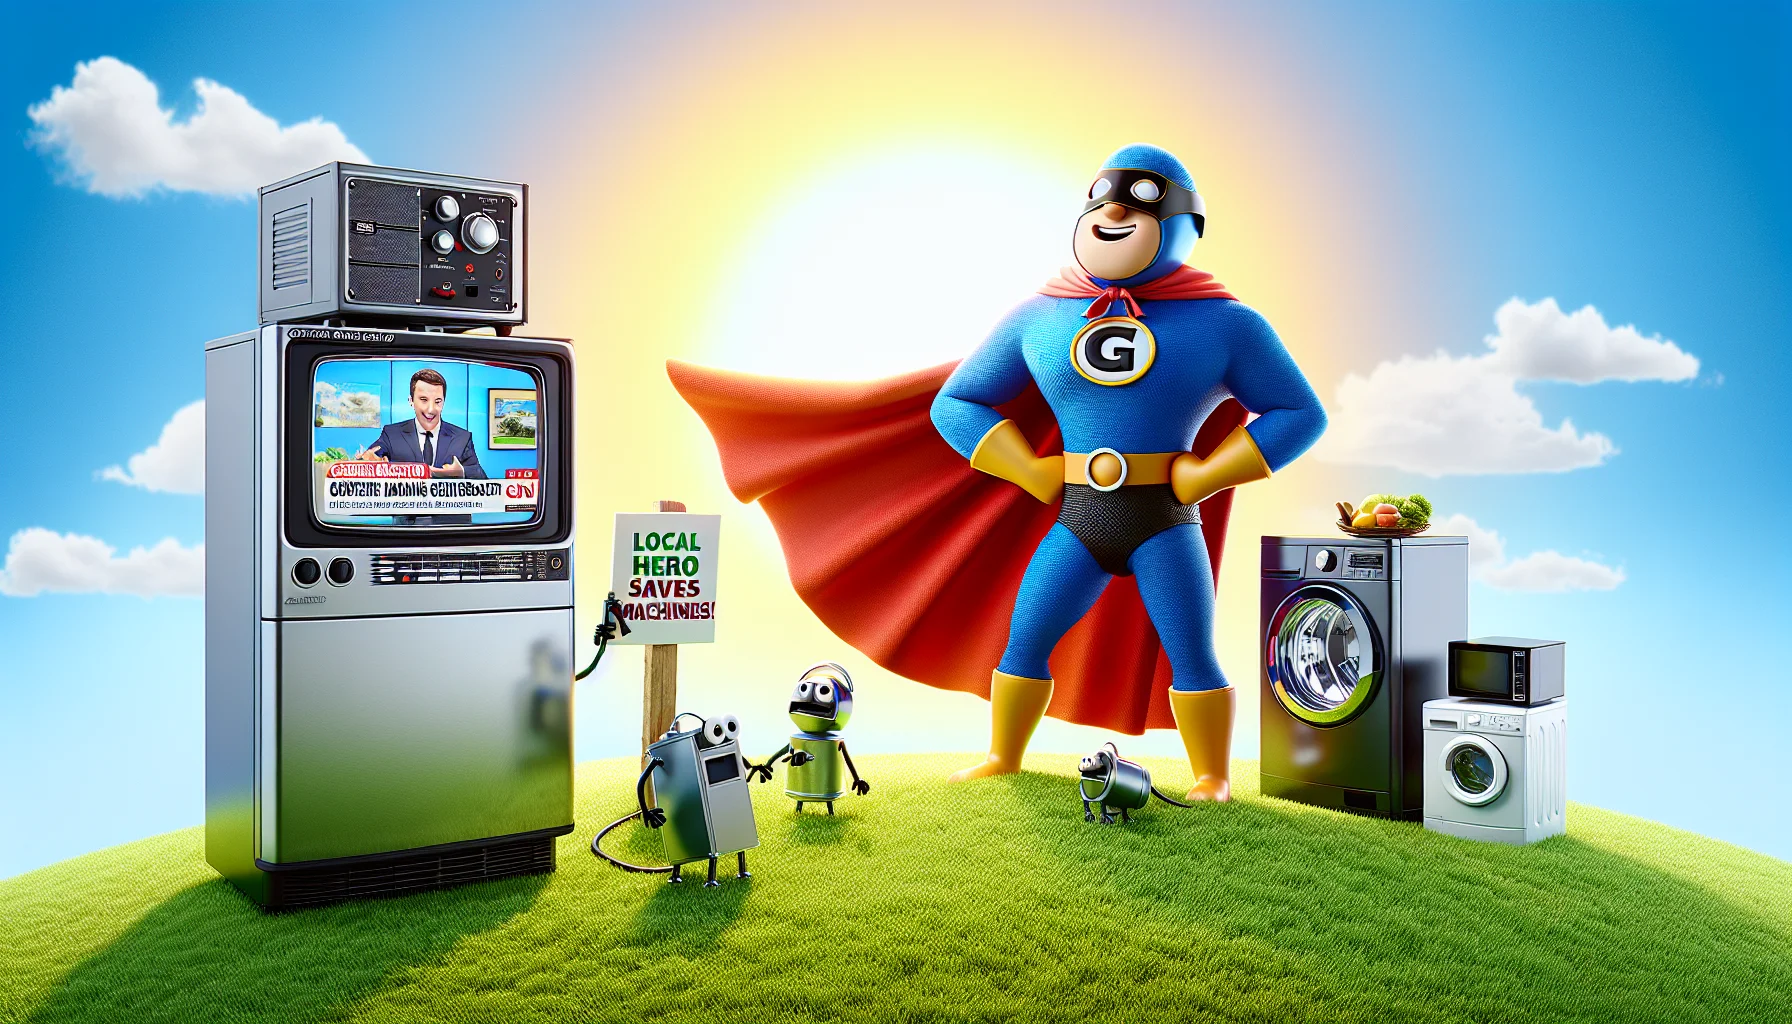 Create an image in a realistic style showing an XT8500EFI generic brand generator in a lighthearted and amusing situation. Illustrate the generator wearing a superhero cape and mask, representing it as 'Captain Power'. It stands triumphantly on a grassy hill, against a sunny backdrop. Surrounding it, illustrate a group of domestic machines - a refrigerator, a TV, a washing machine - looking awestruck, as though meeting their superhero. The TV should be displaying a satirical anchor reporting on this whimsical event, captioned 'Local hero saves machines from power outages!'. Keep the scene vibrant and light-hearted to entice people to generate electricity.